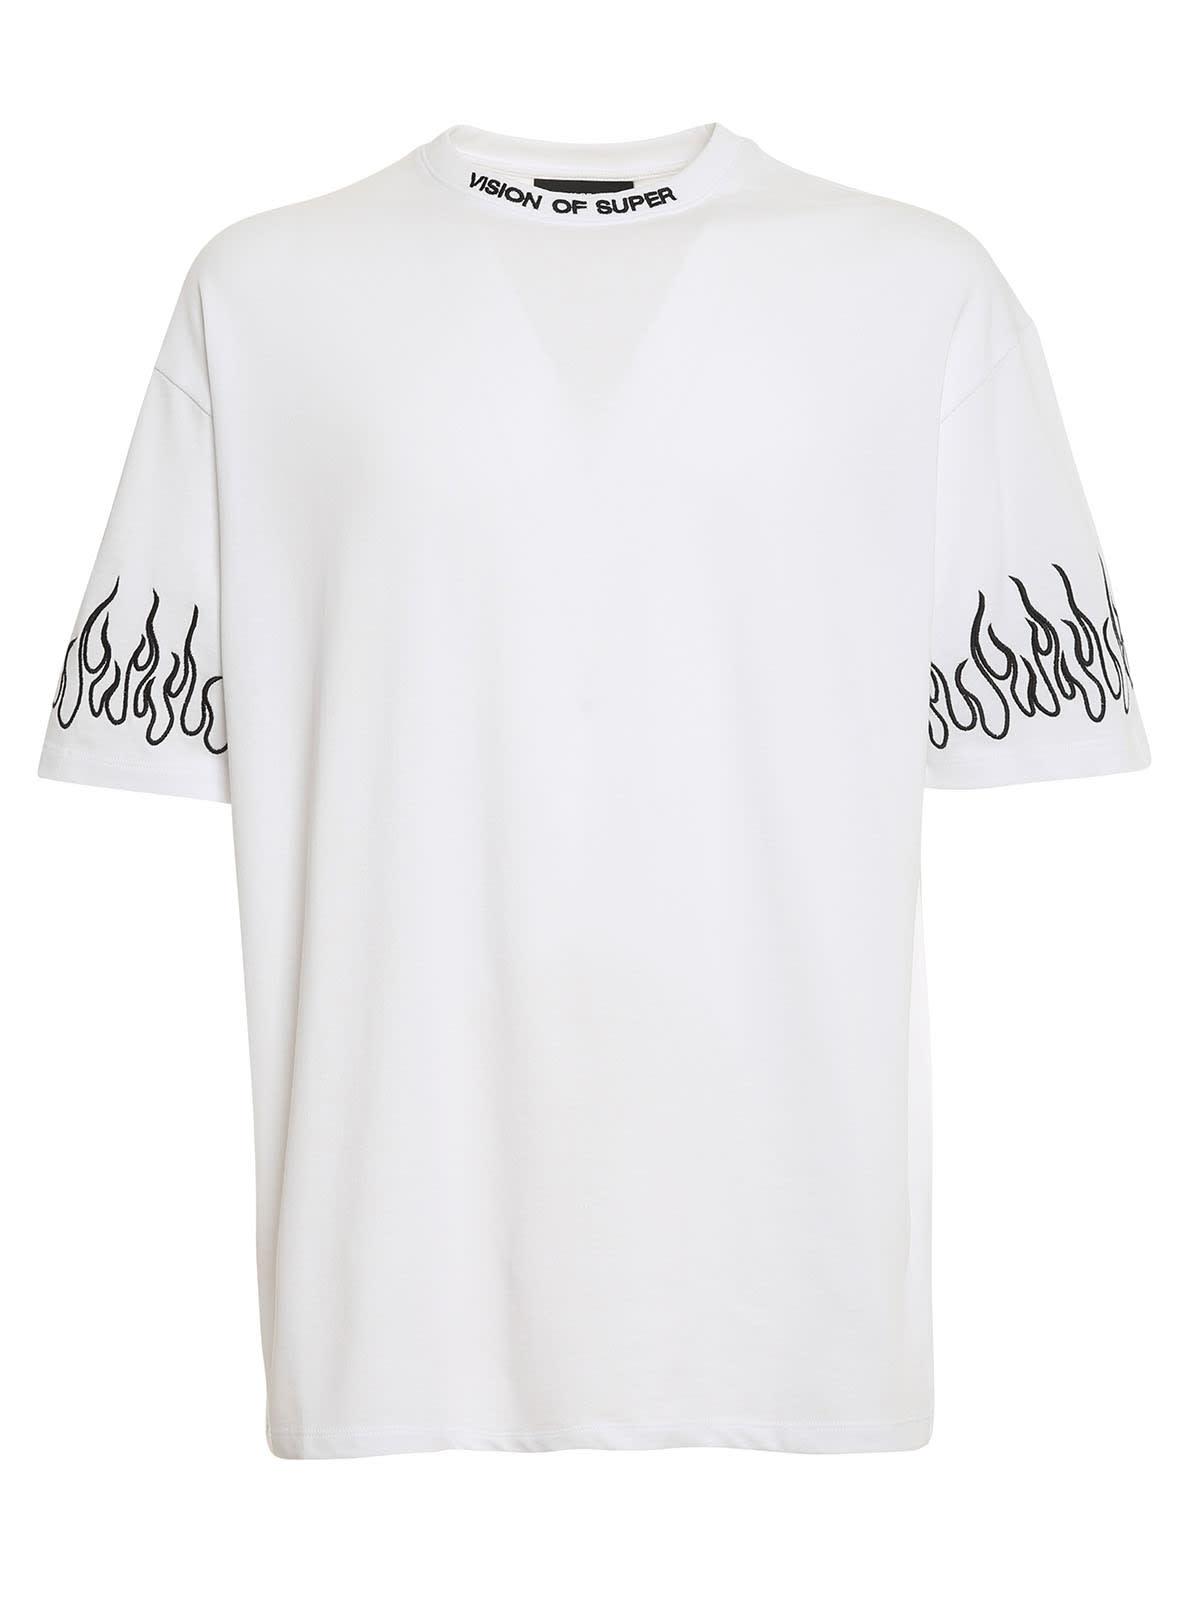 Vision of Super Tshirt Embroidered Black Flame